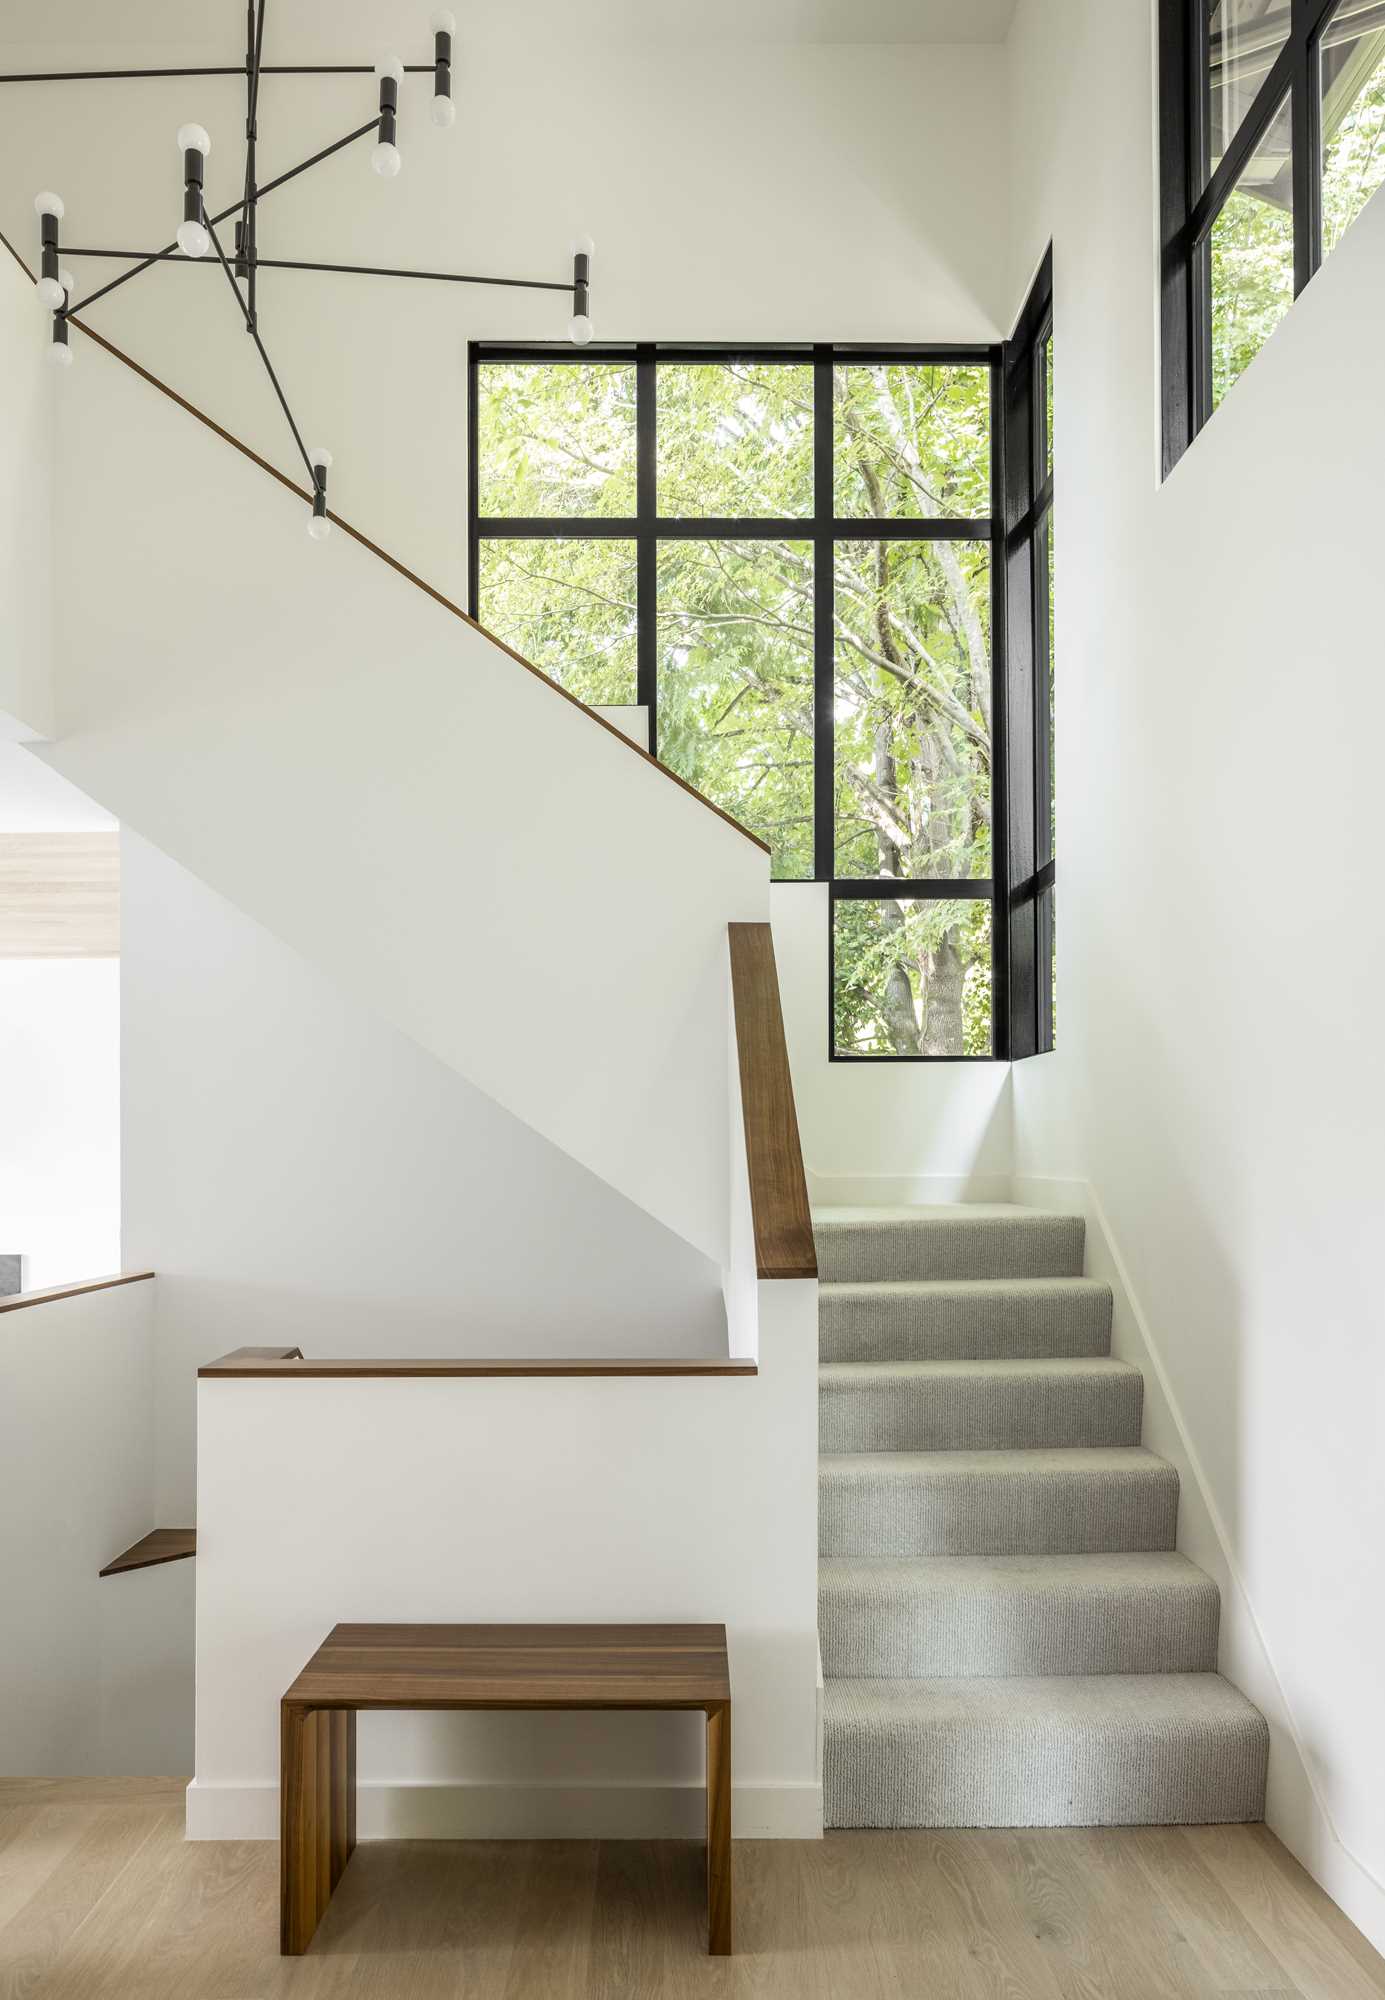 The new stairs in this remodeled home were designed to be bright with light-colored walls, light flooring, and minimal wood handrails.